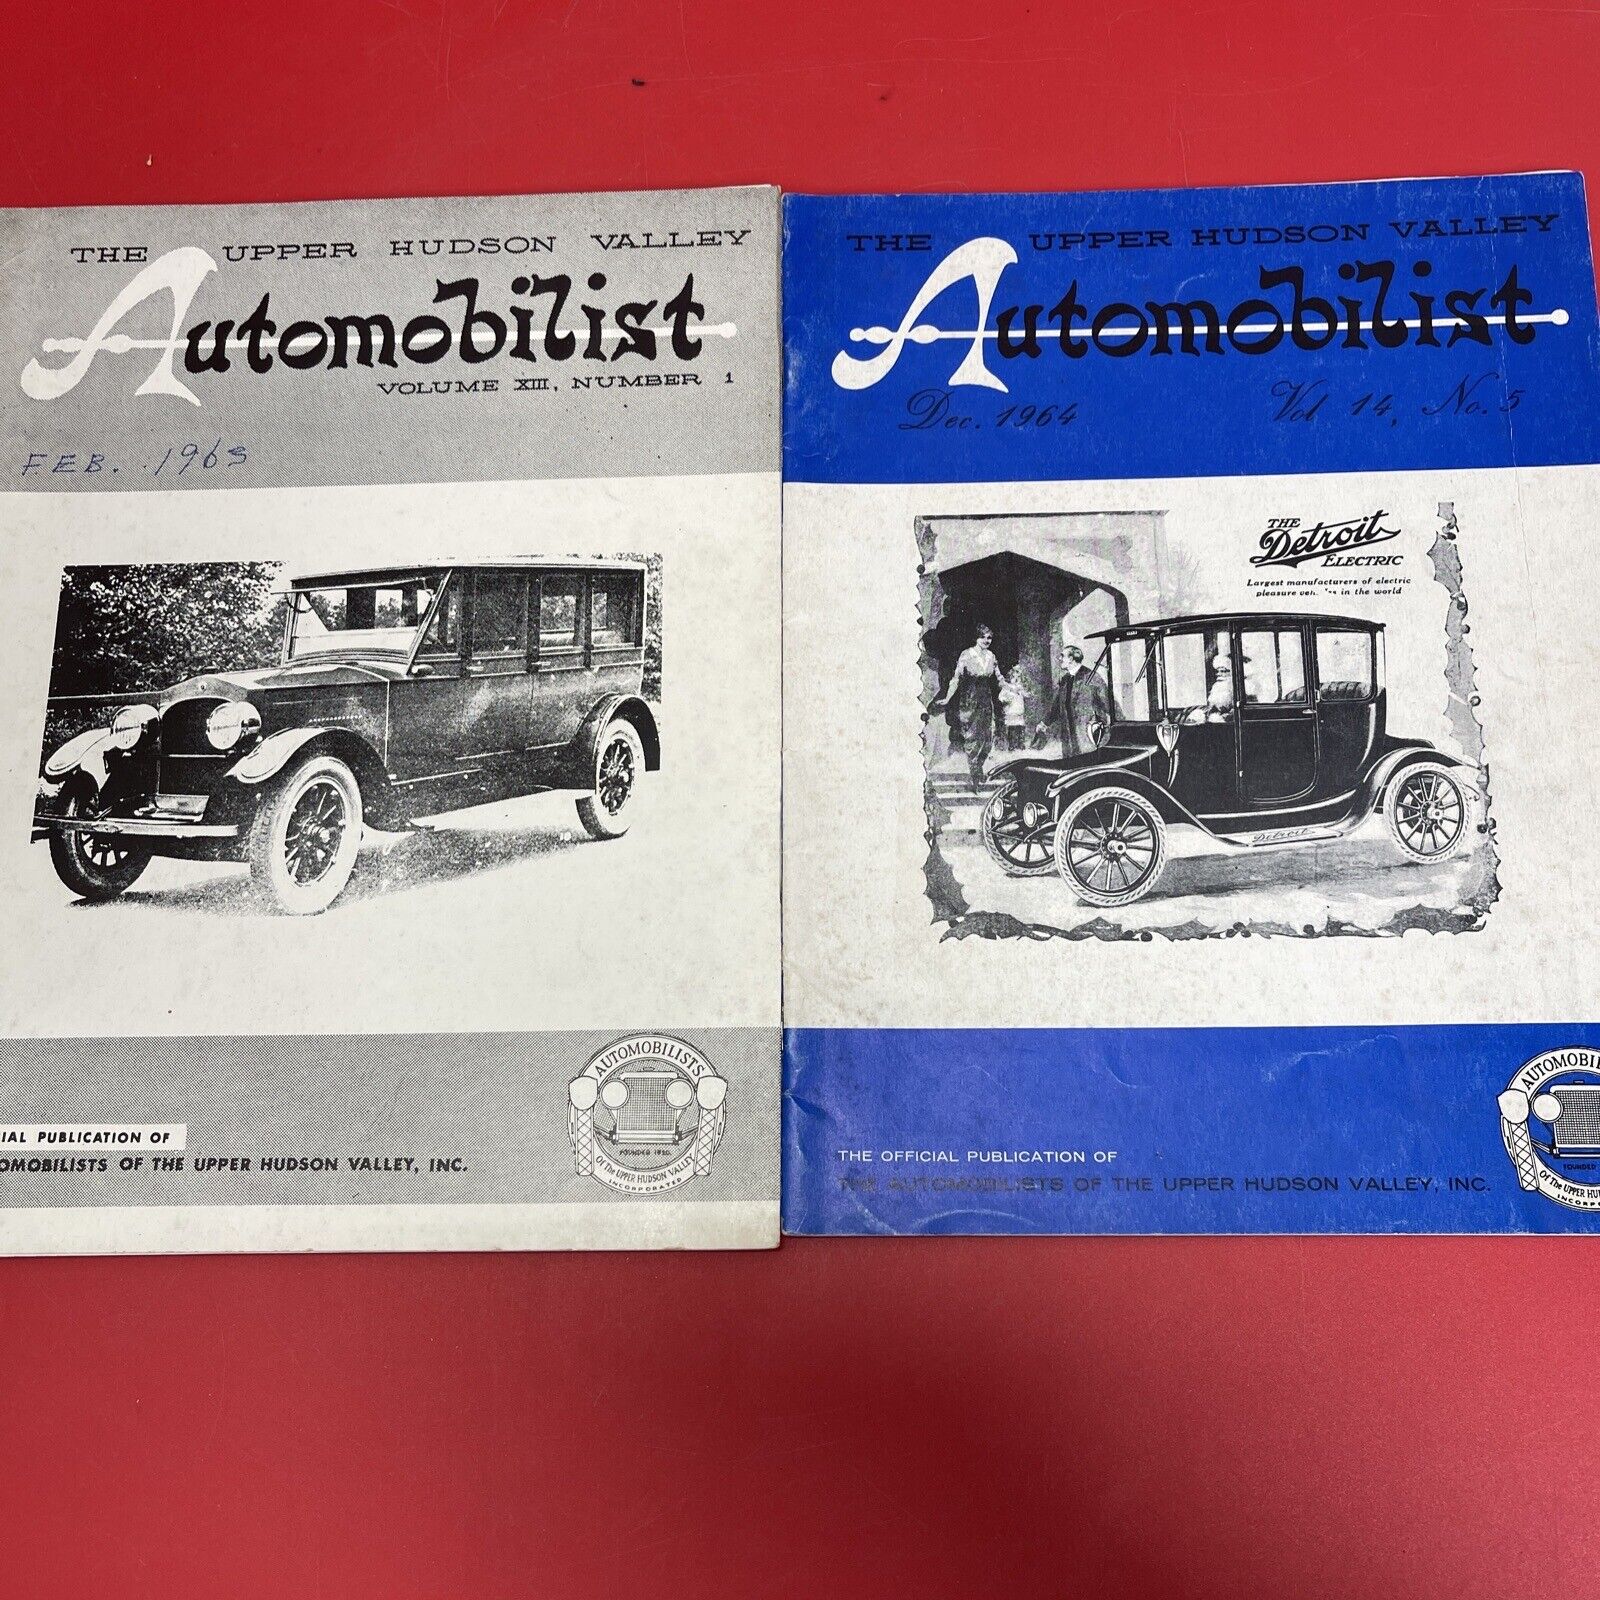 The Automobilist Club Official Publication of Upper Hudson Valley Lot 2